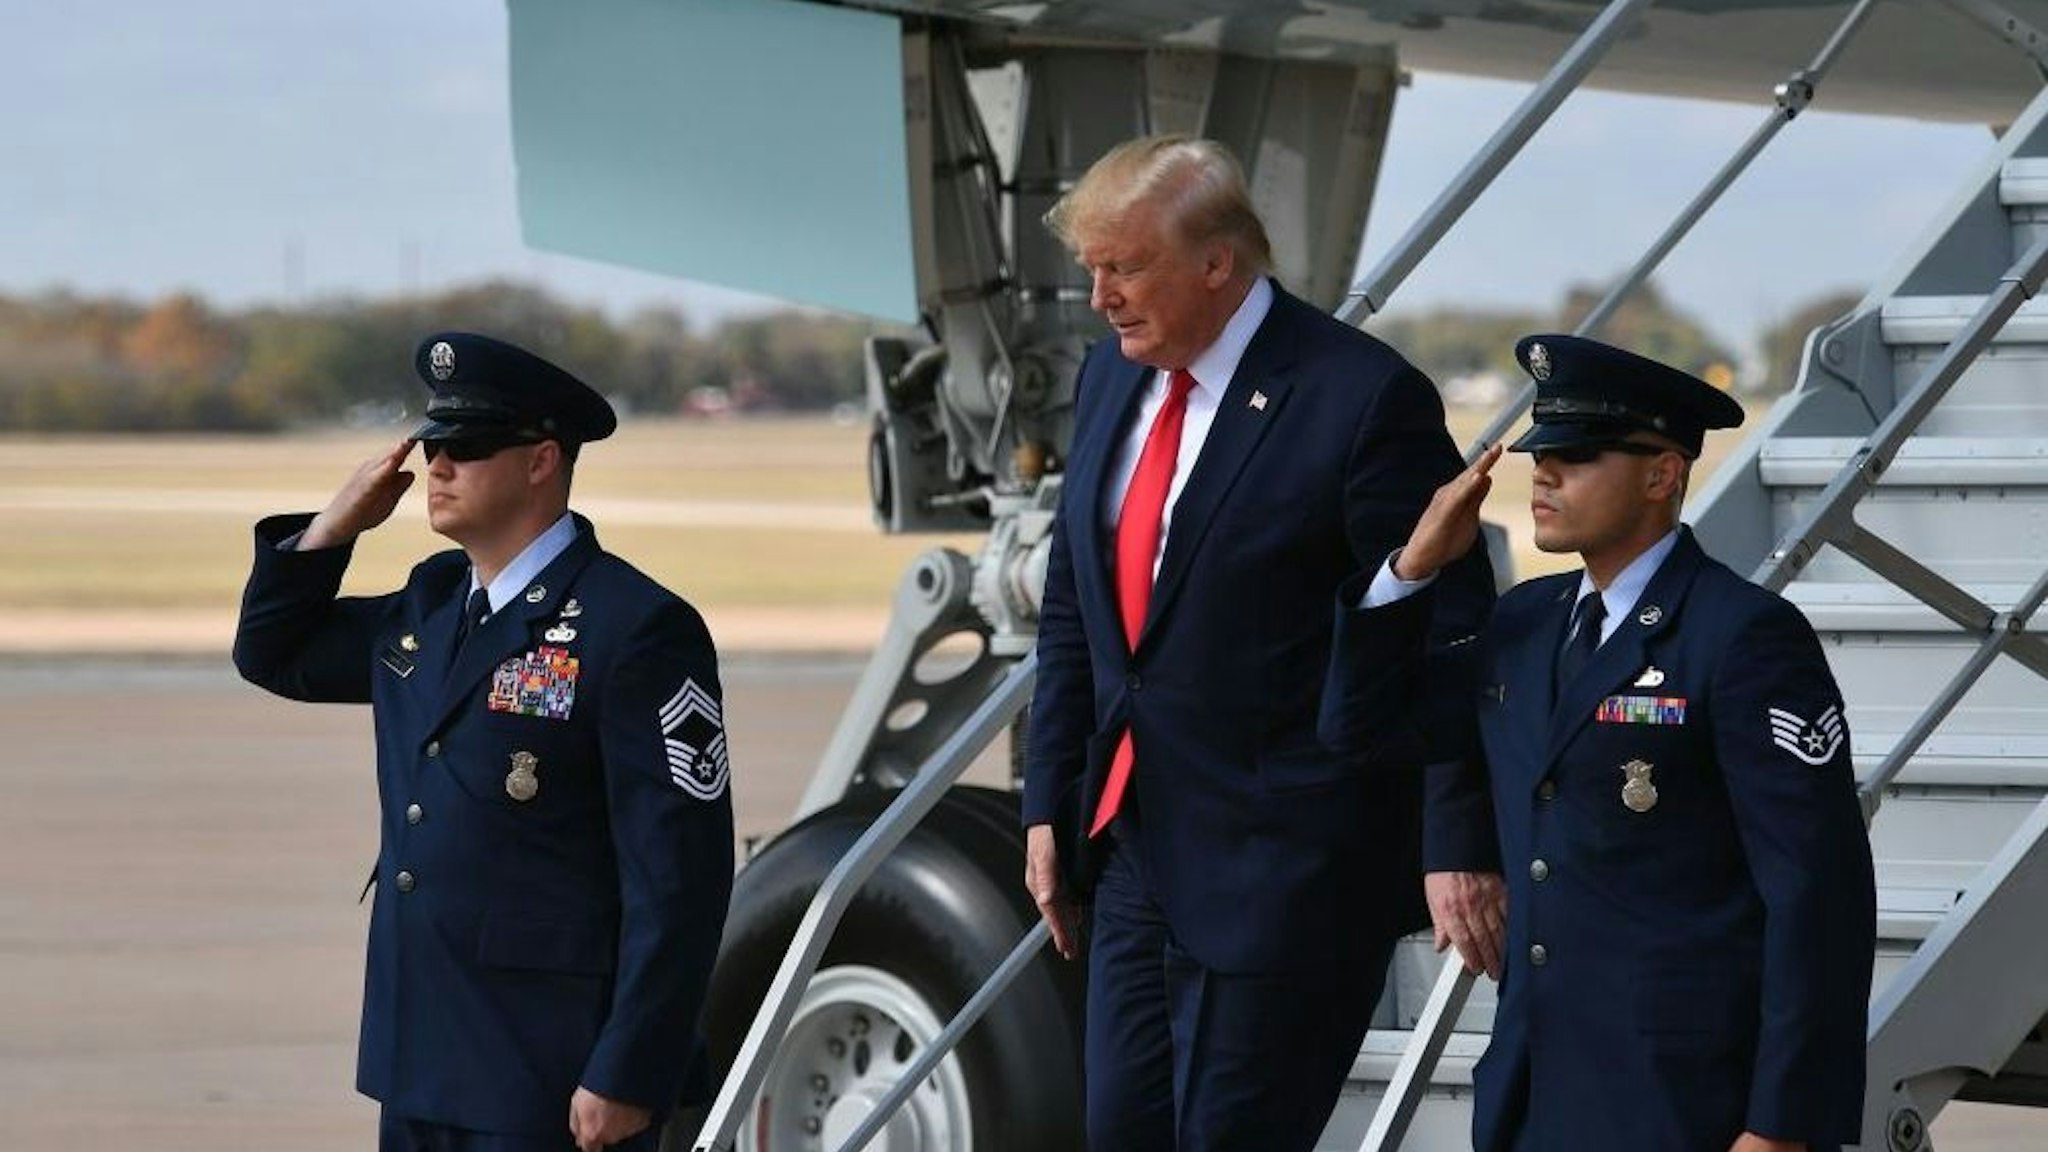 US President Donald Trump steps off Air Force One upon arrival at AustinBergstrom International Airport in Austin, Texas on November 20, 2019. - Trump is in Austin to tour an Apple computer manufacturing facility where the Mac Pro is assembled. (Photo by MANDEL NGAN / AFP)